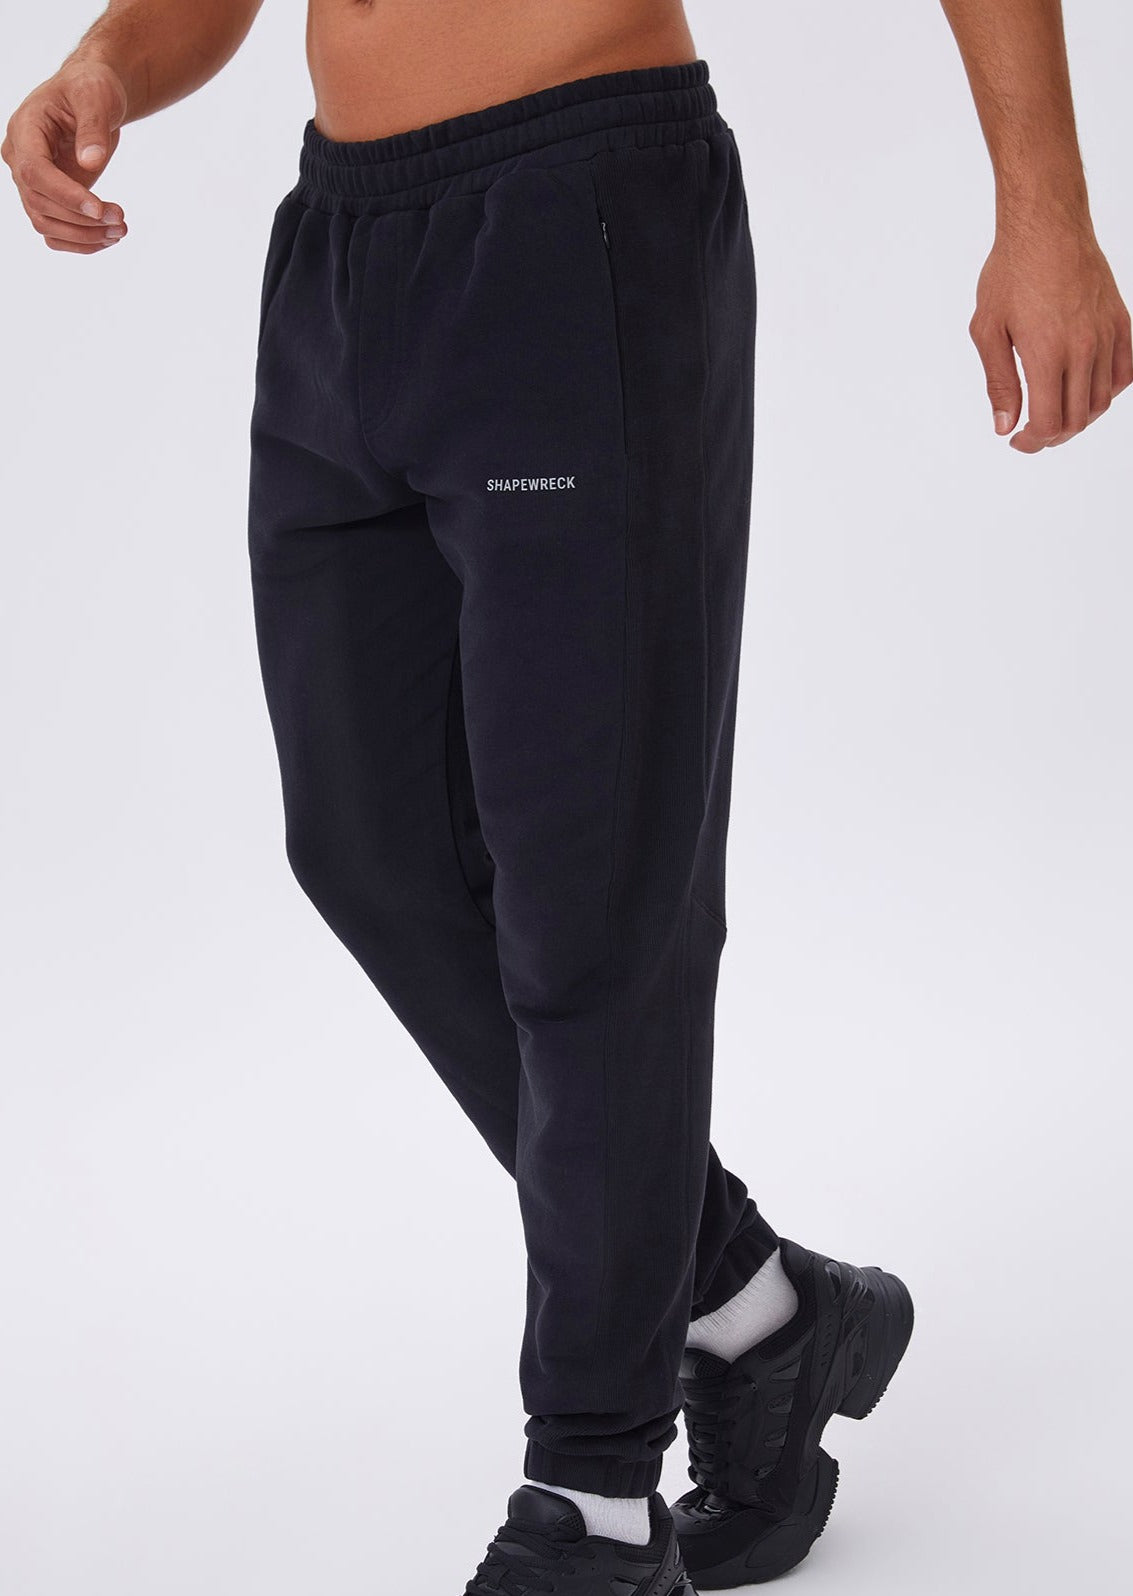 RELAXED FIT Sweatpant PRIMARY JOGGER - BLACK